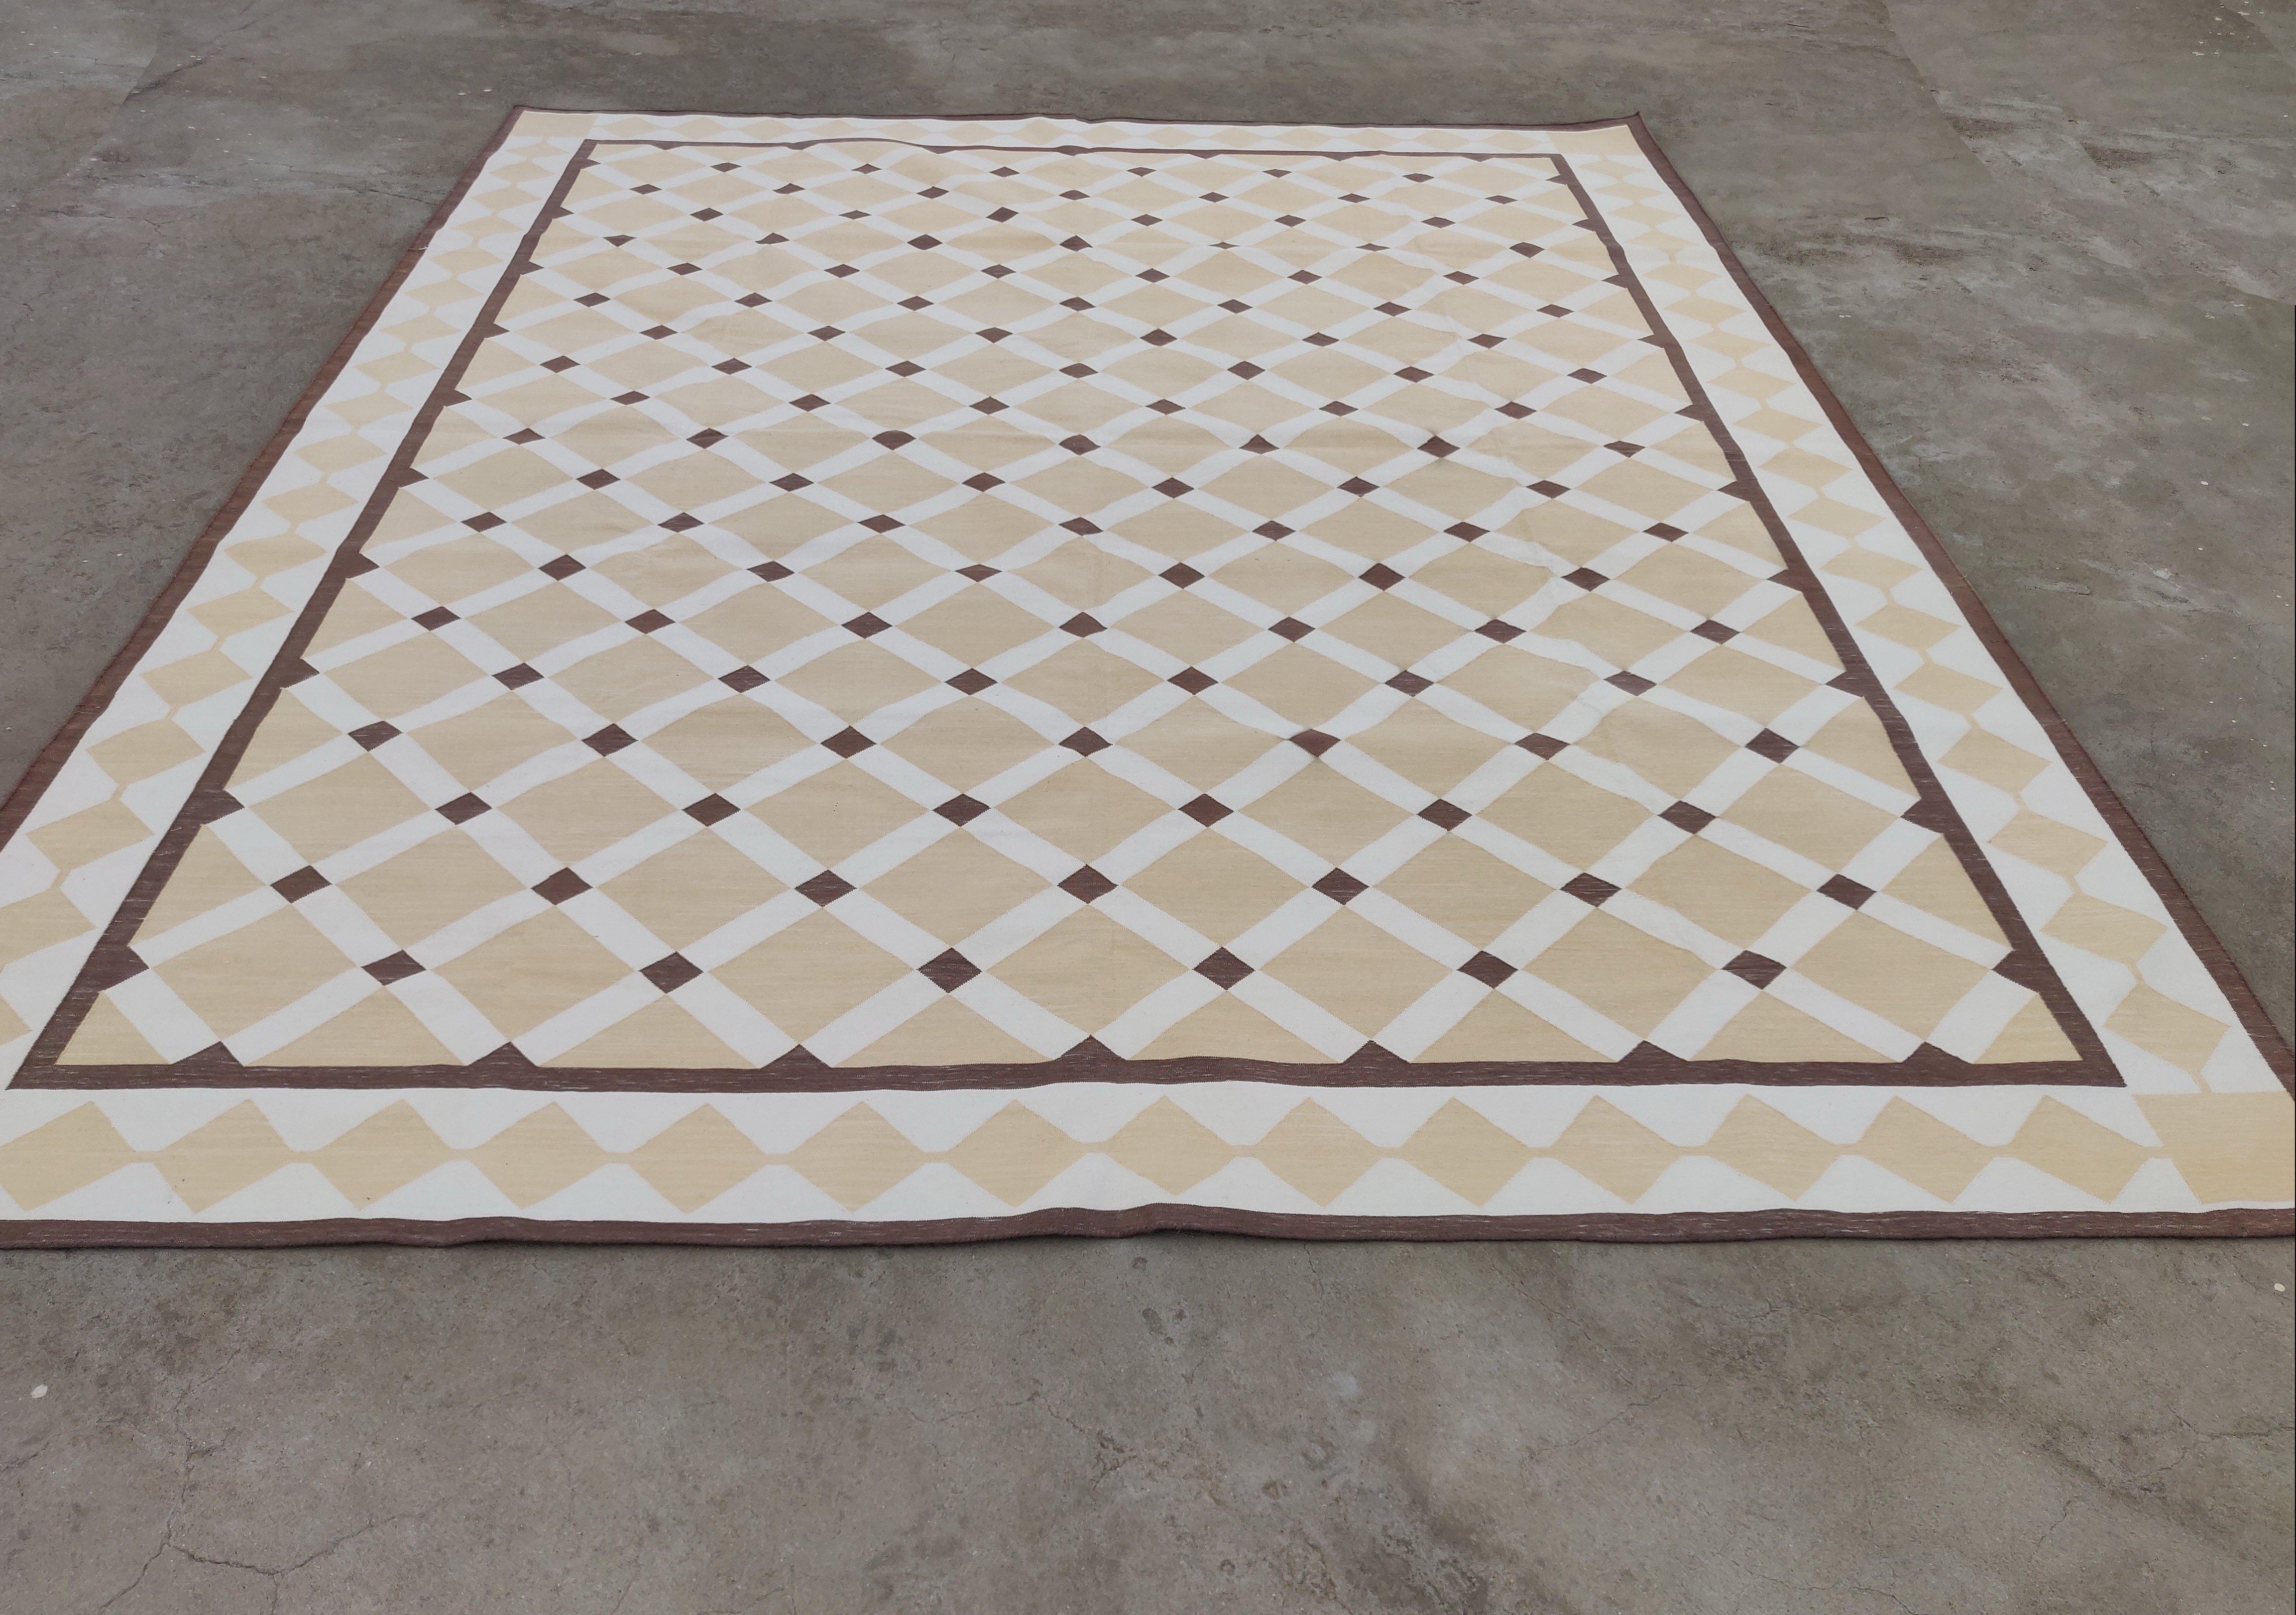 Hand-Woven Handmade Cotton Area Flat Weave Rug, 8x10 Beige And Brown Geometric Indian Rug For Sale